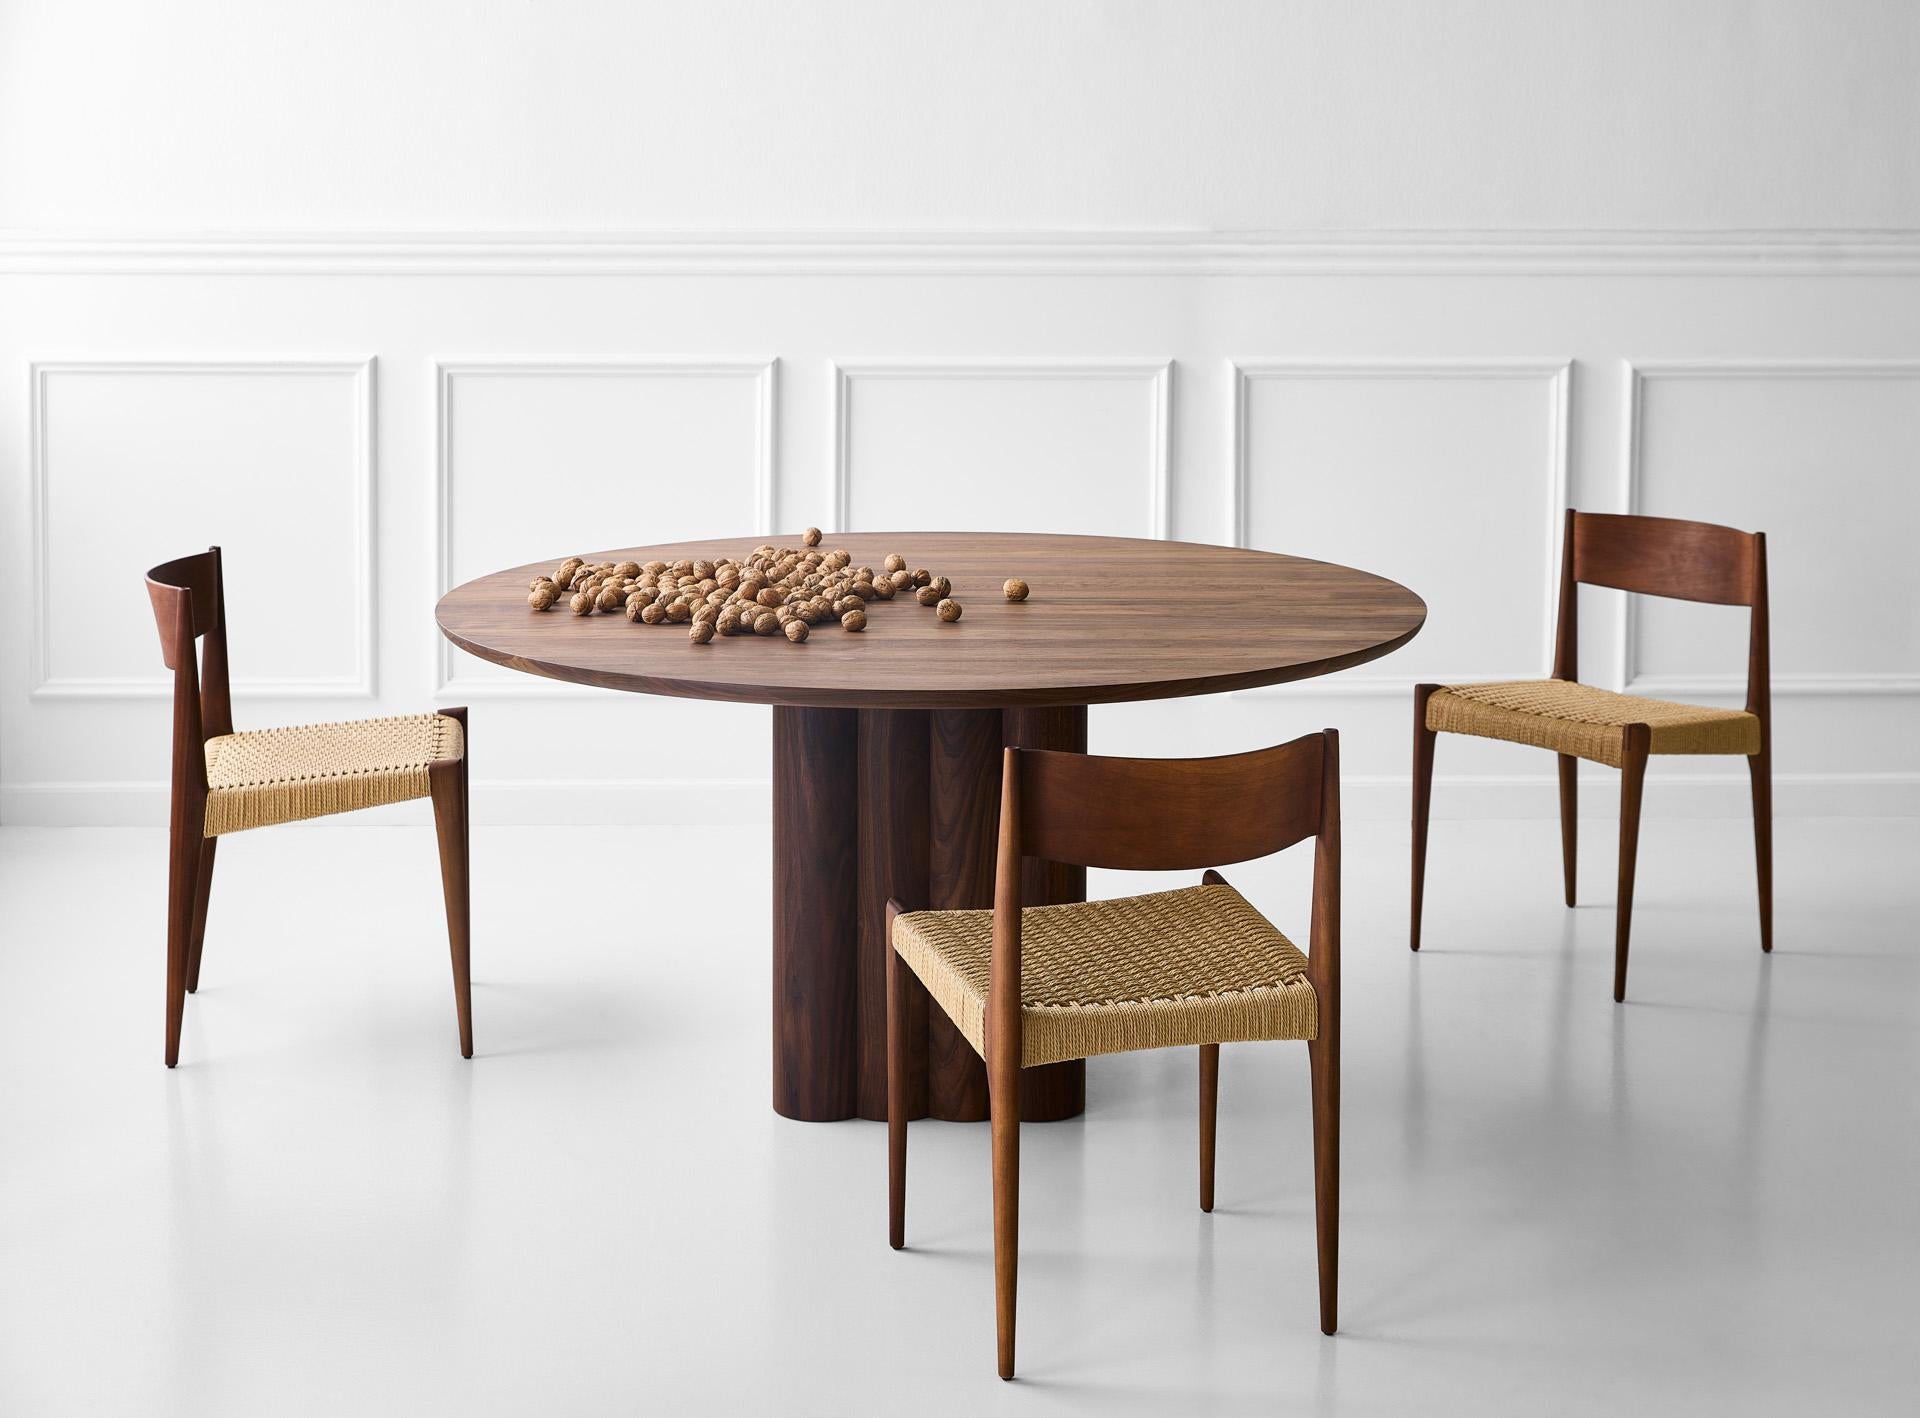 PLUSH dining table, round, 150 cm.
Solid wood table top and legs. Handmade in Denmark. 
Signed by Jacob Plejdrup for DK3

Table's height: 72 or 74 cm

Sold model: 
Natural Oak (oil treatment)
Cube base: 46x46 cm
Table top Thickness: 30